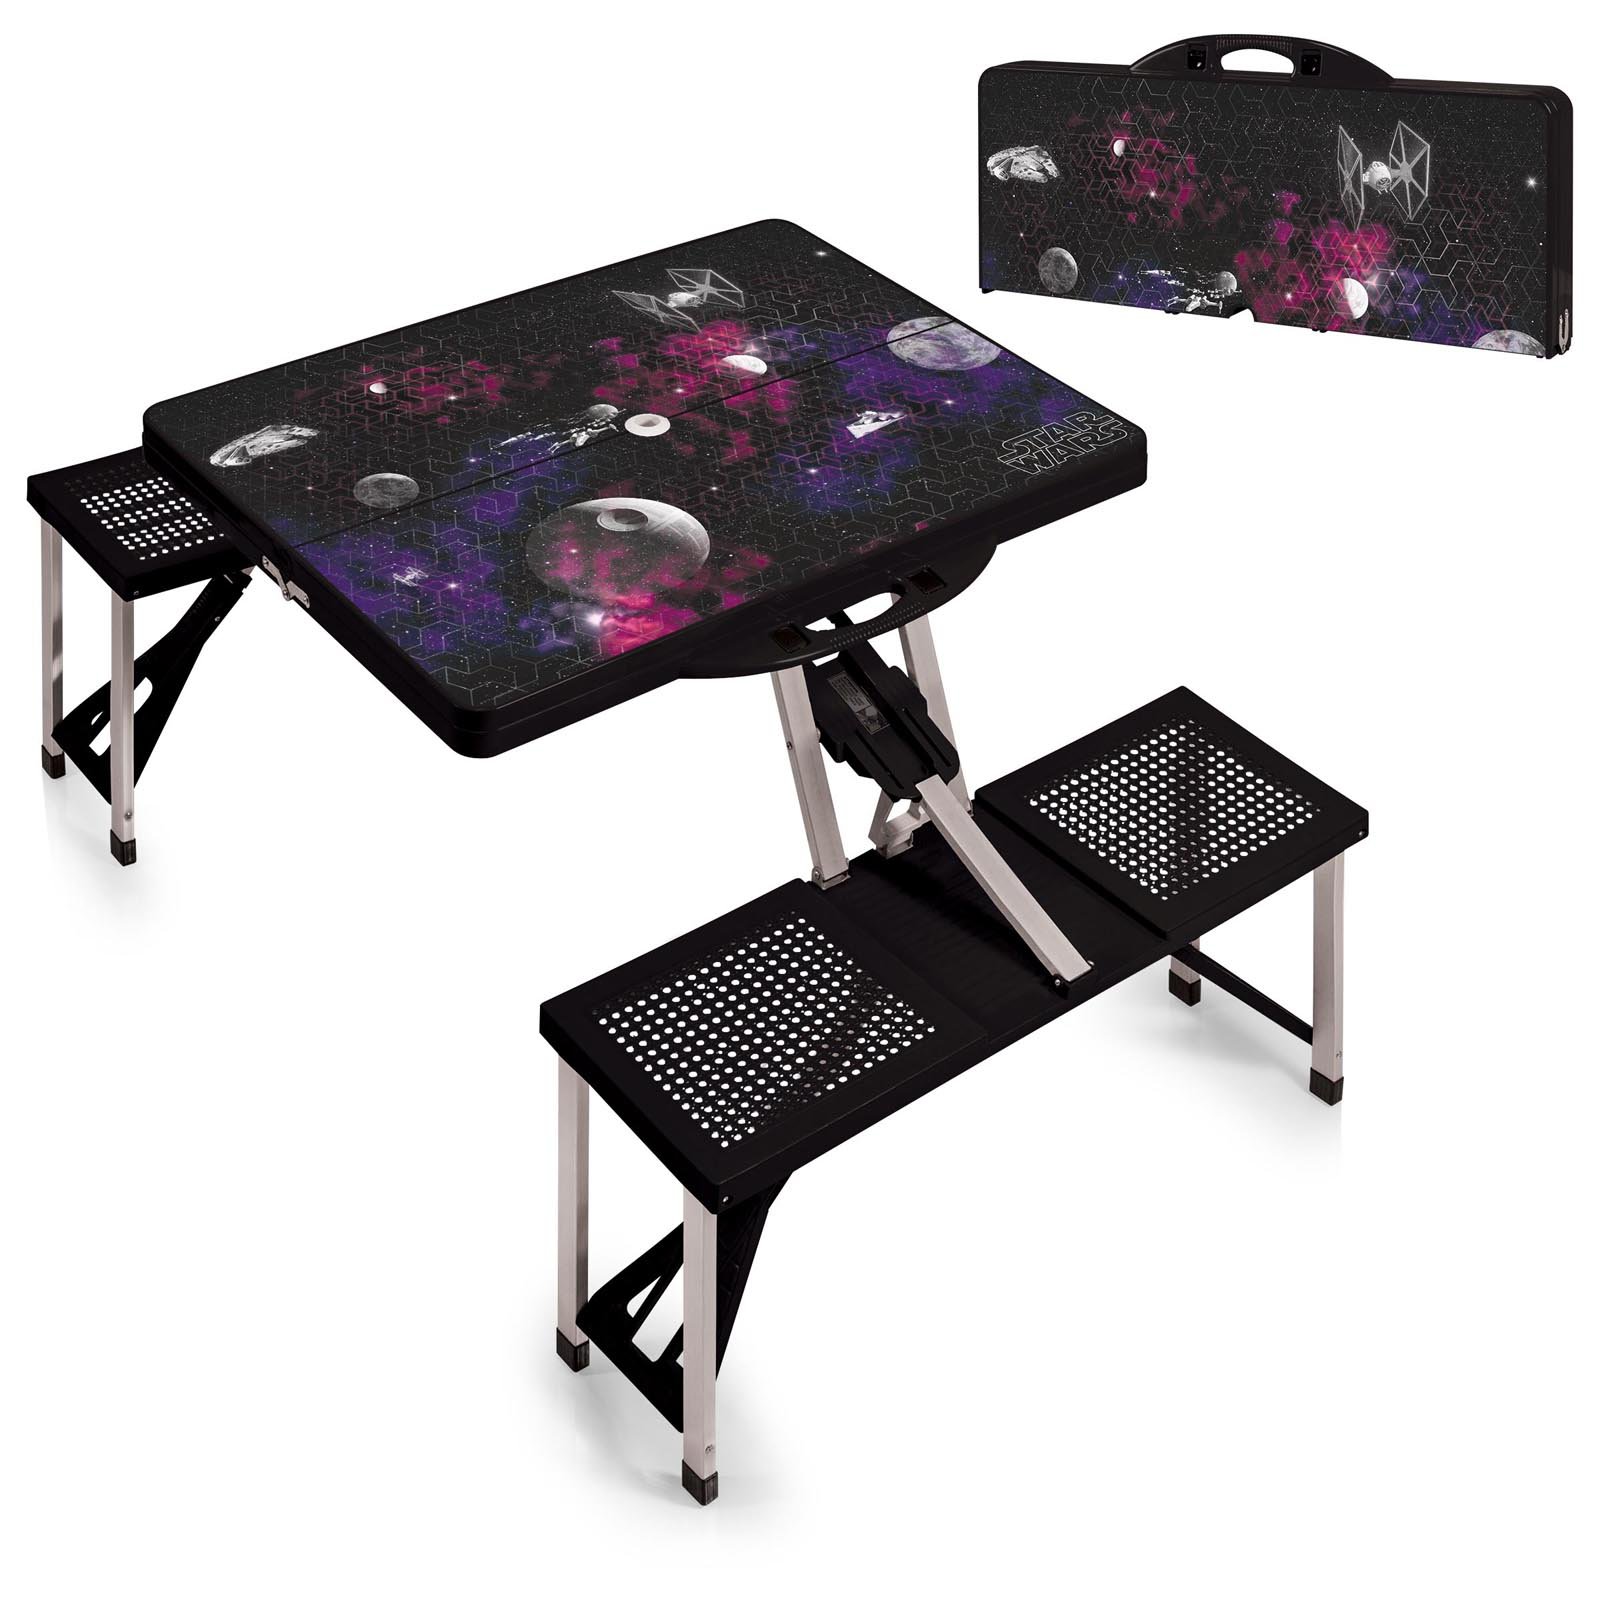 Picnic TimeStar Wars Portable Folding Table and Chair Set - image 4 of 7